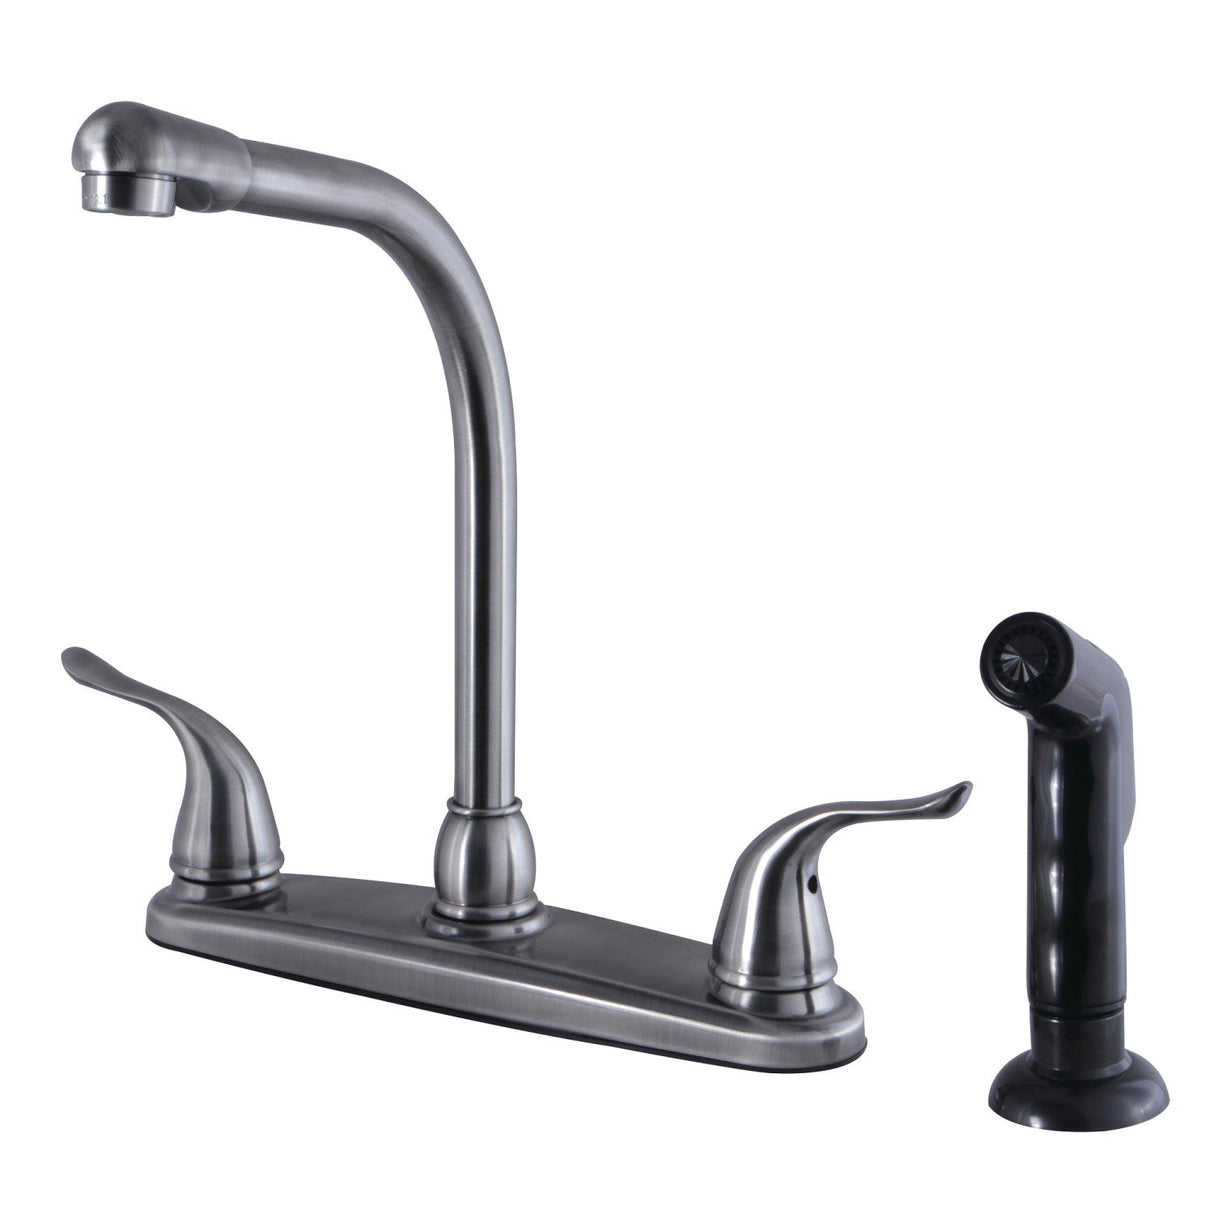 Yosemite FB2754YLSP Two-Handle 4-Hole Deck Mount 8" Centerset Kitchen Faucet with Side Sprayer, Black Stainless